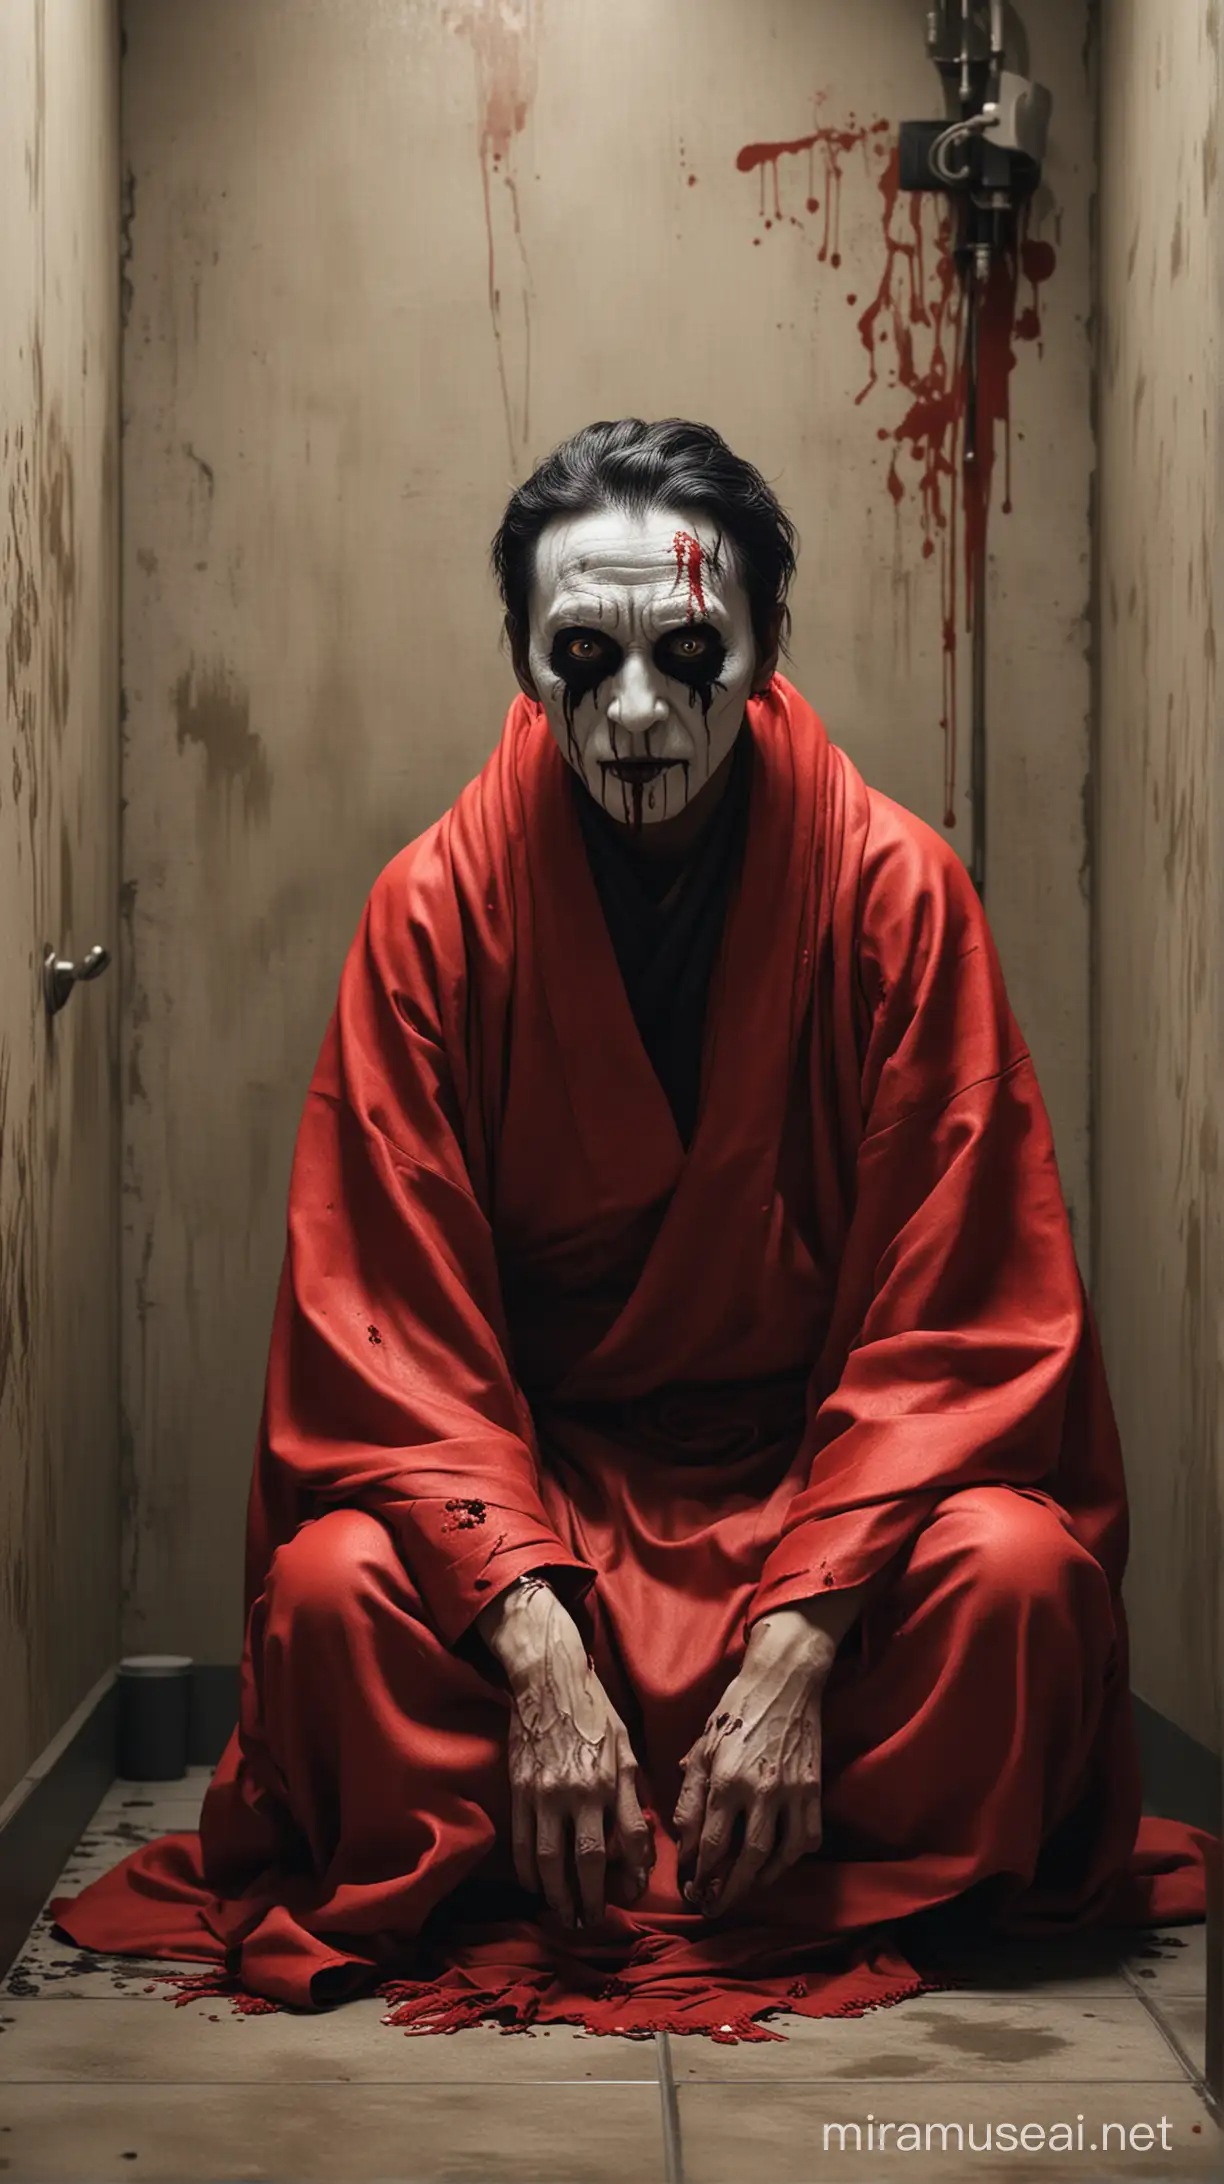 Create a realistic 4k image of the urban legend from japan aka manto, a masked spirit wearing a red cloak with scary large black eyes sitting down in a public bathroom with blood on the walls